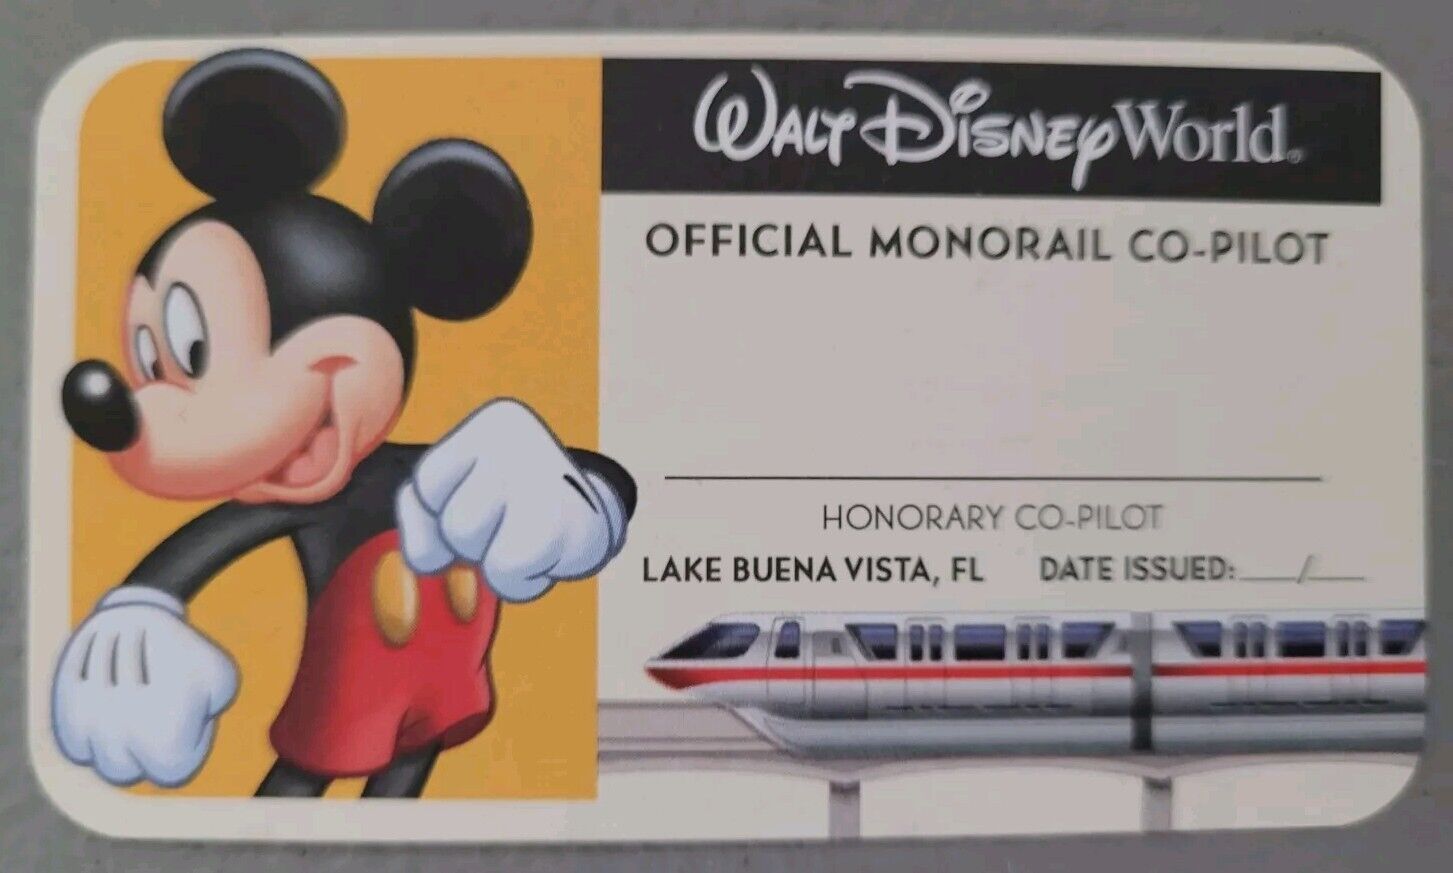 RARE Honorary Official Monorail Co-Pilot License Disney World WDW Monorail